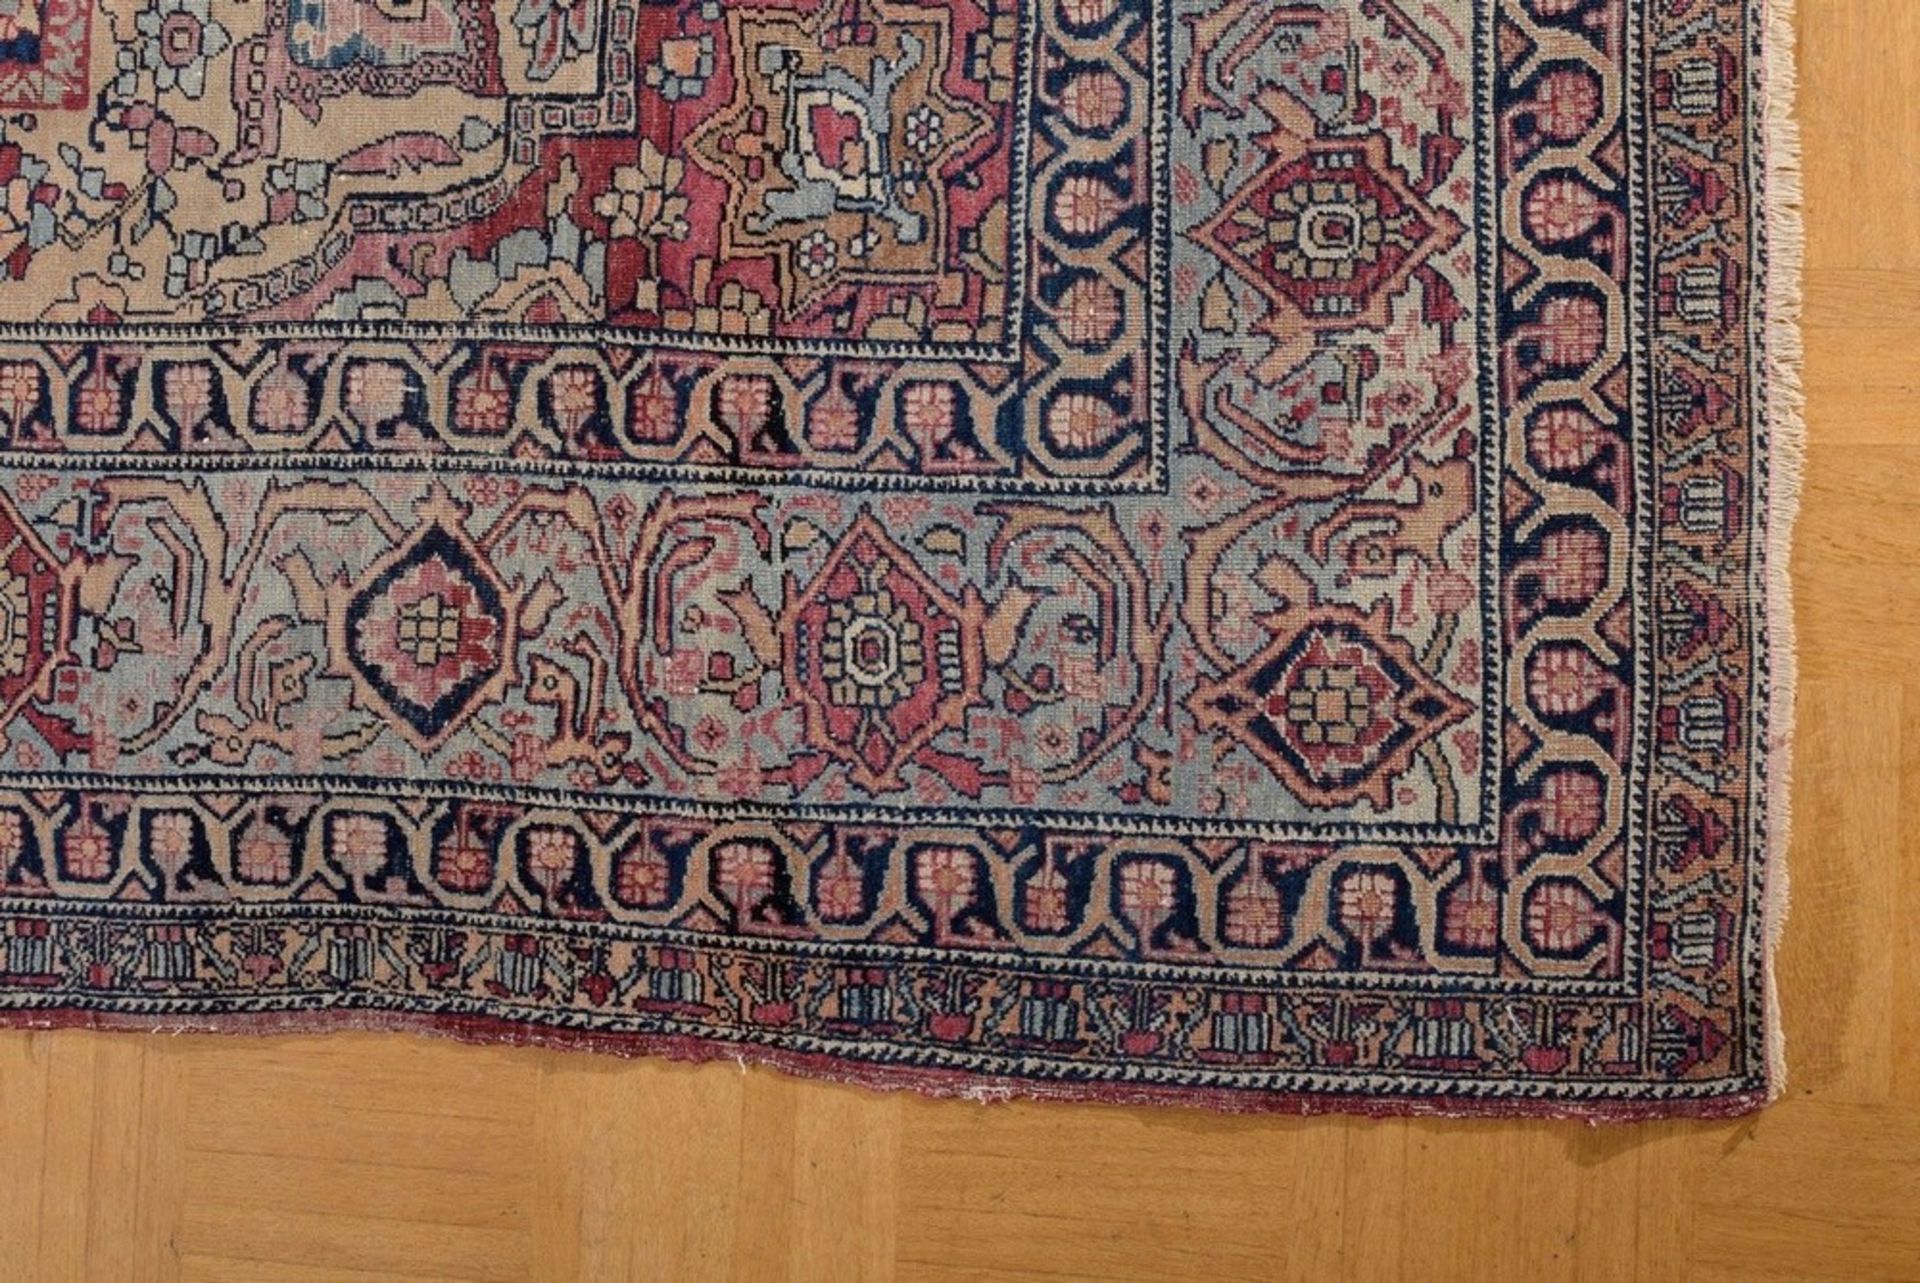 A very finely woven carpet from Tehran, with a densely closed velvet-like pile in pastel colours, d - Image 3 of 7